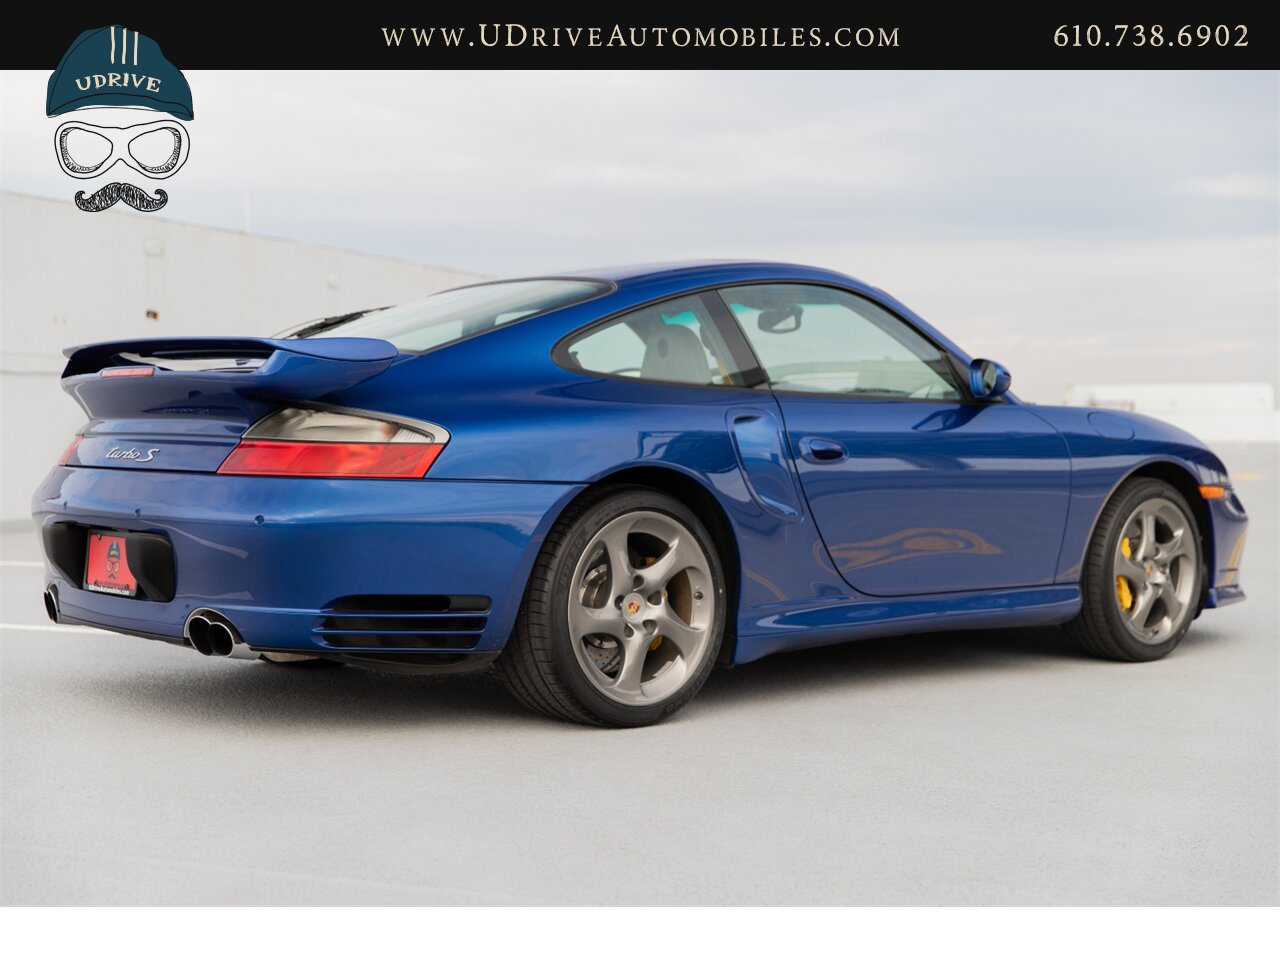 2005 Porsche 911 Turbo S Factory Aerokit Extremely Rare Cobalt Blue  Yellow Deviating Stitching 1 of a Kind Spec $160k MSRP - Photo 20 - West Chester, PA 19382